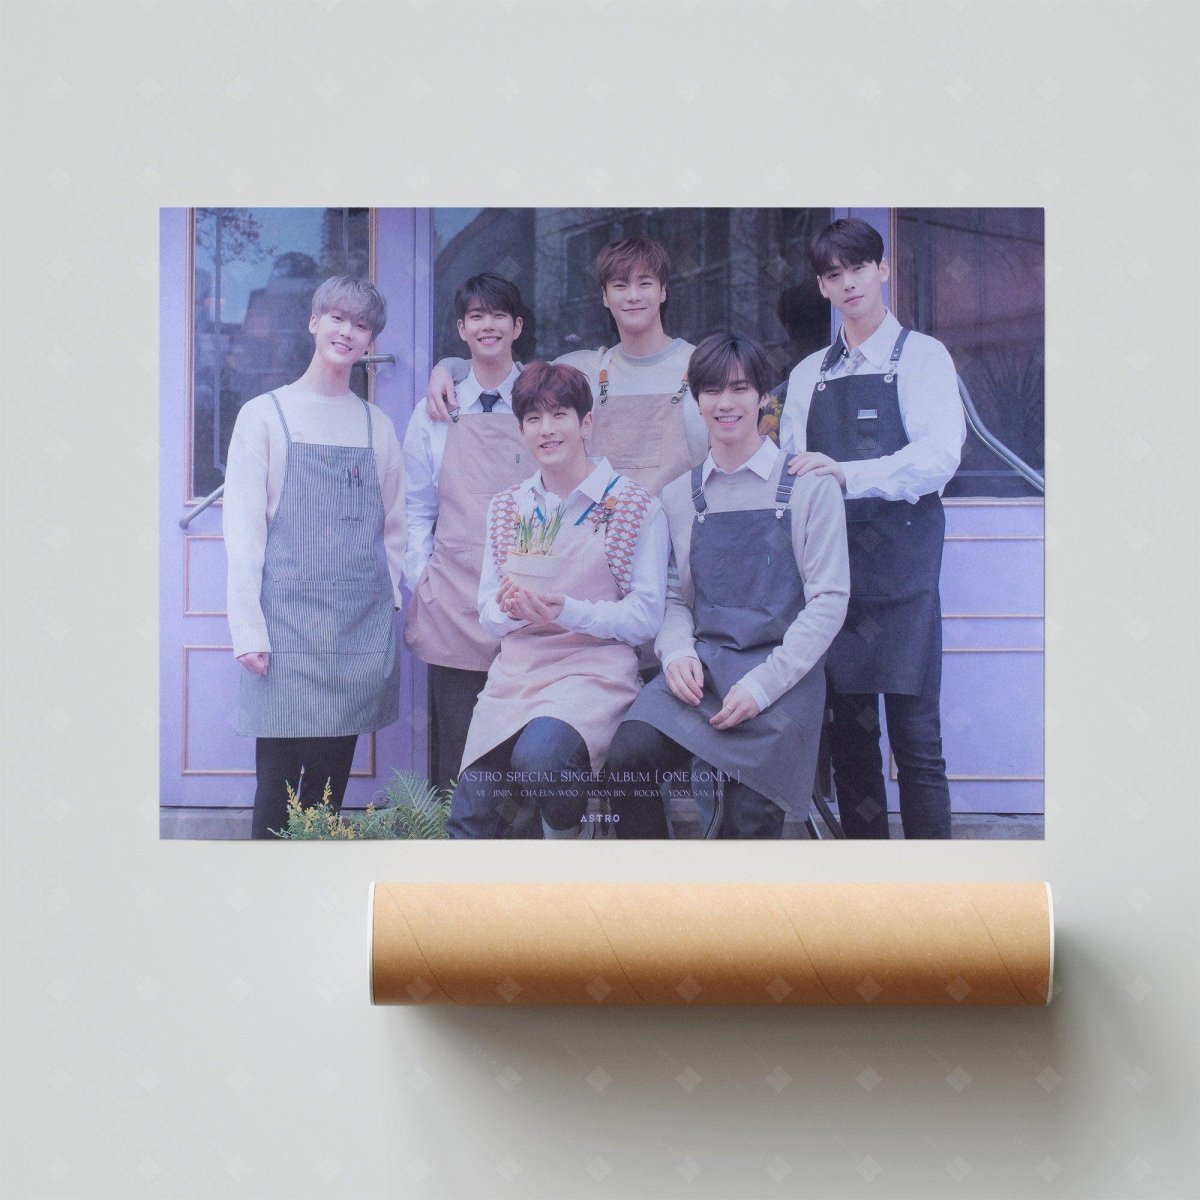 ASTRO - Special Single Album [ONE&ONLY] Limited Edition Official Poster - KAVE SQUARE